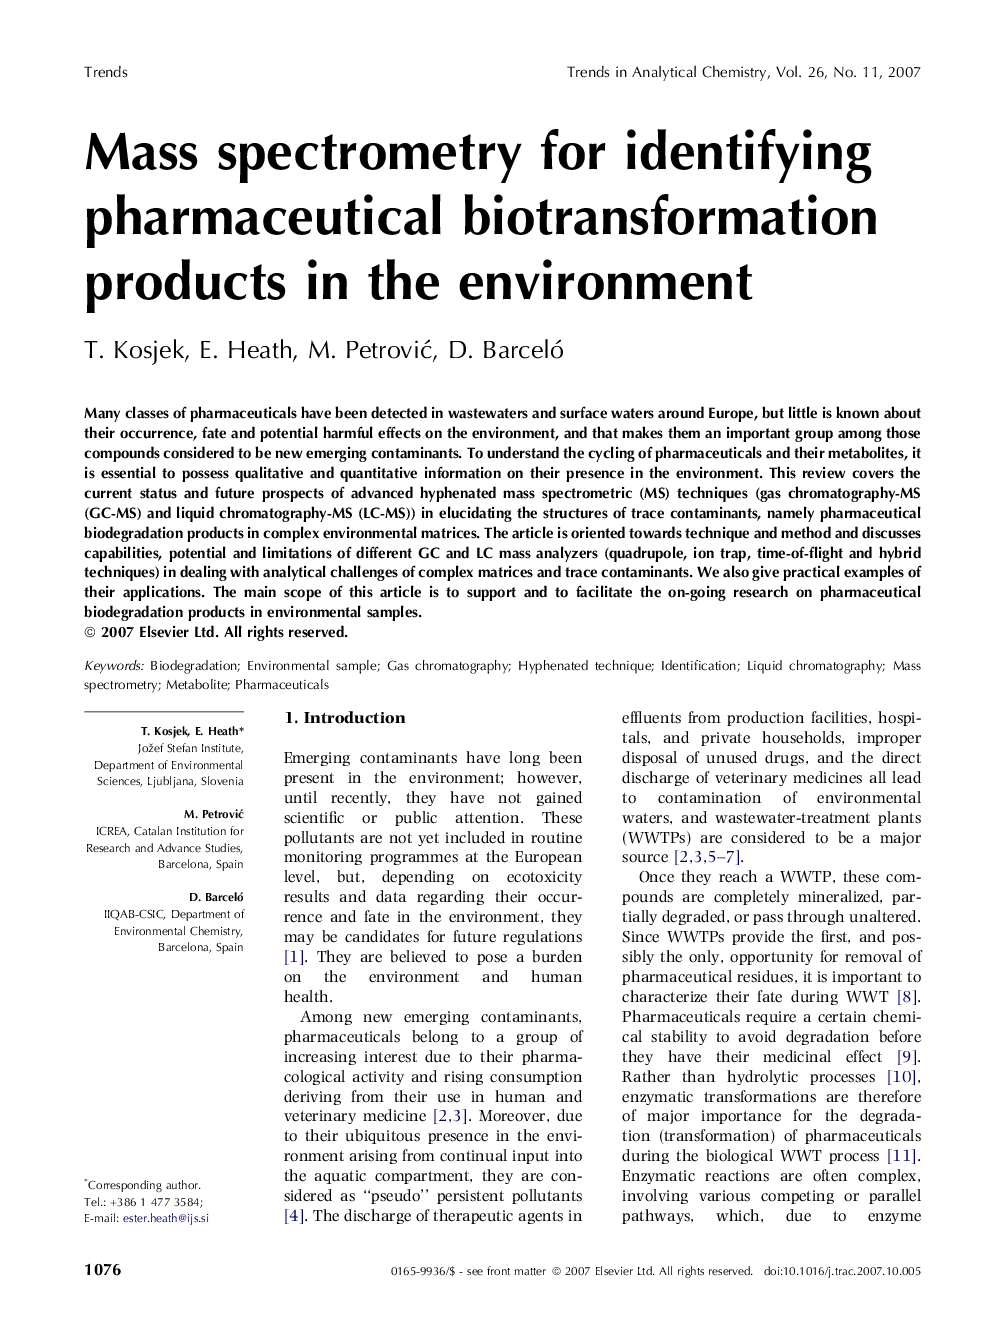 Mass spectrometry for identifying pharmaceutical biotransformation products in the environment